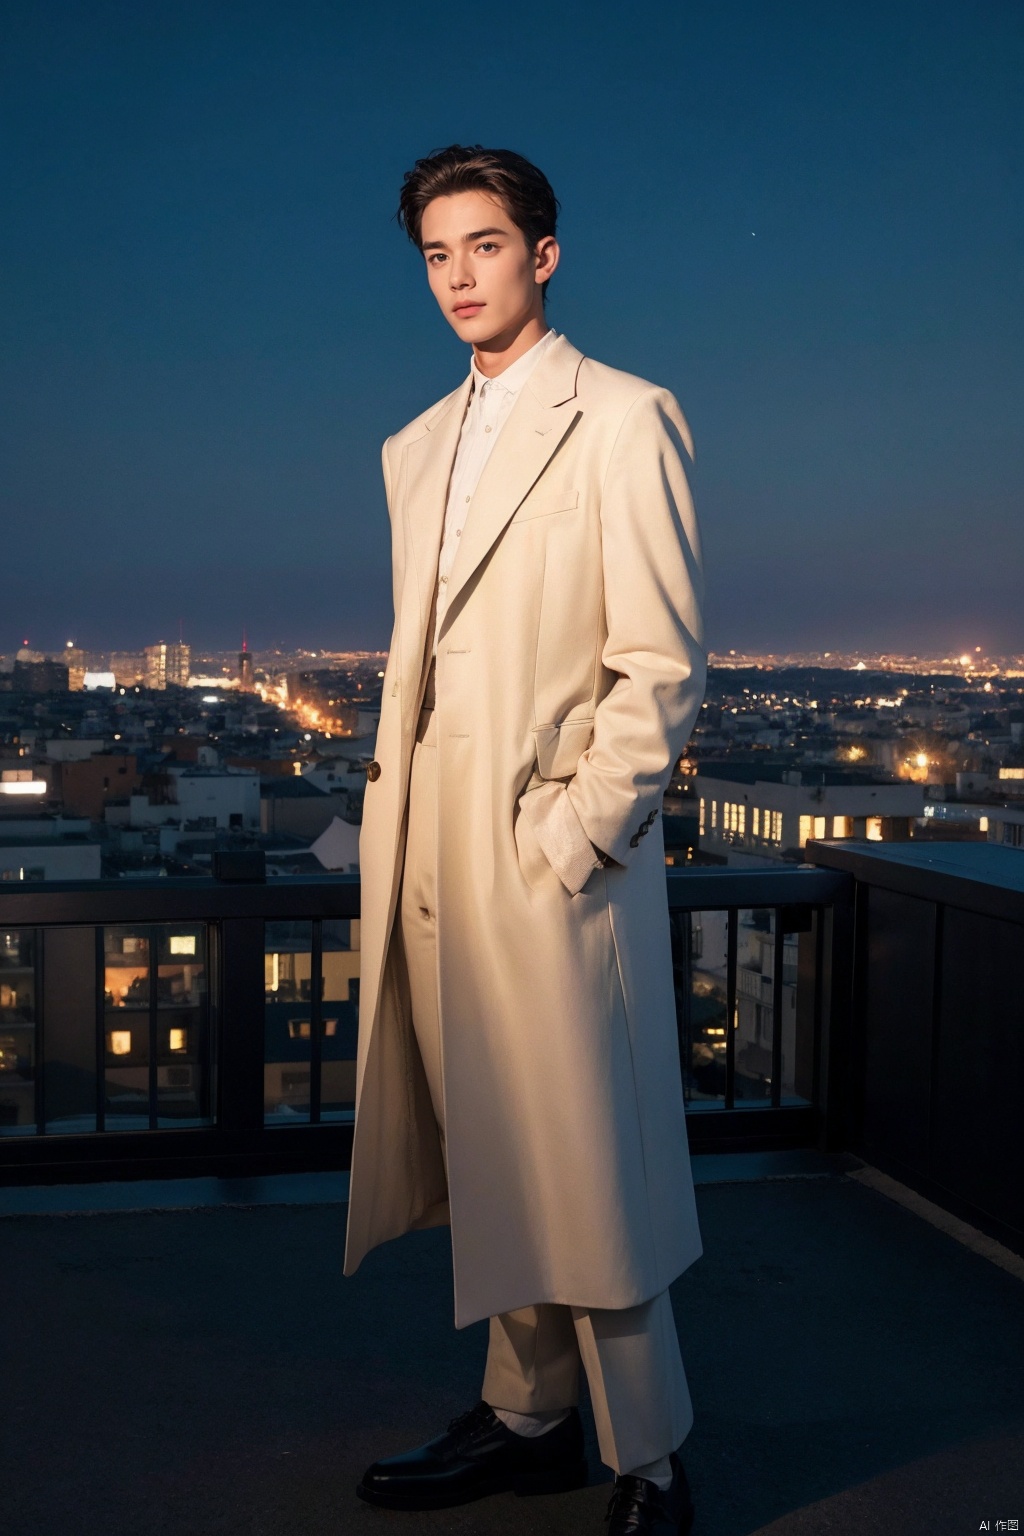 nighttime rooftop couture, 35mm panoramic snapshot, fashion-forward male model standing tall on a dimly lit rooftop under the starry night sky, full-length composition exuding urban sophistication, dressed in a statement ensemble from the latest menswear collections, posing confidently against the glittering skyline backdrop, leveraging the ambient city glow and moonlight to enhance the visual impact of the outfit, ACDEFZ_rooftop_elegance, high-resolution imagery, adept use of long exposure to capture the vibrancy of the city below while retaining crisp focus on the subject, creating a captivating narrative that merges the nocturnal allure of the urban landscape with the cutting-edge style of a modern man,((poakl)), monkren